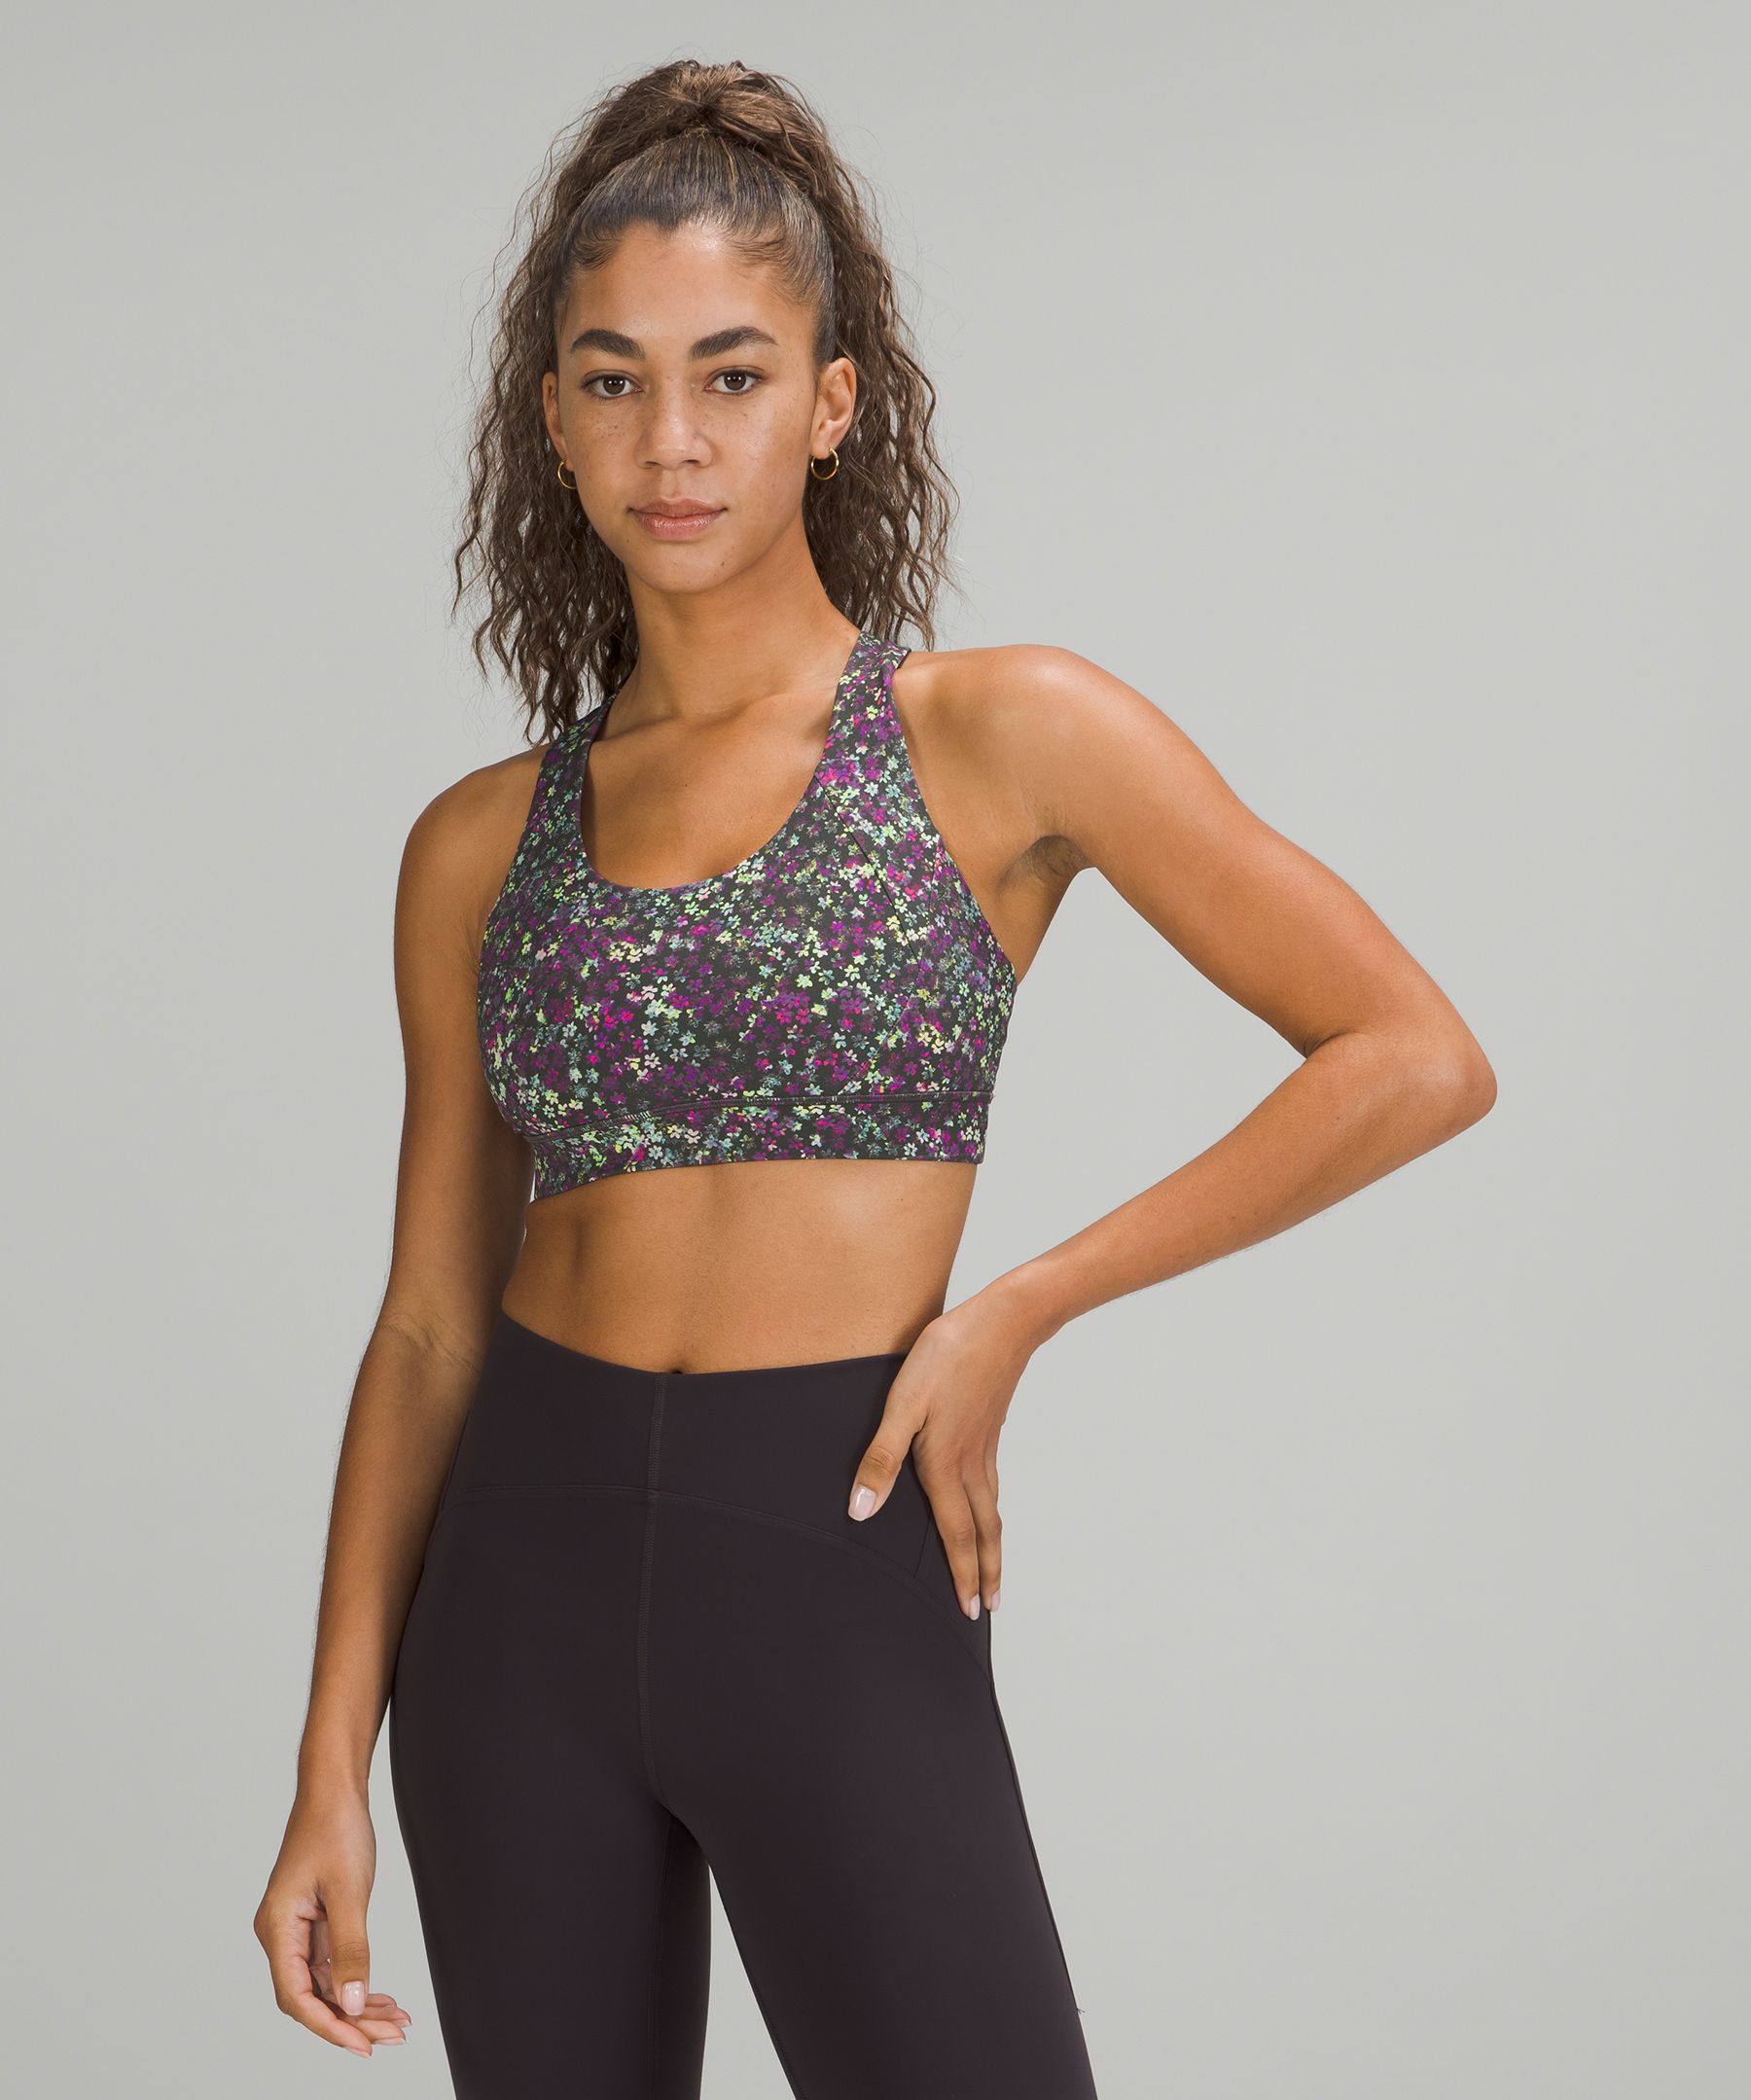 Lululemon Free To Be Elevated Bra Light Support, Dd/ddd(e) Cup In Fleur Motion